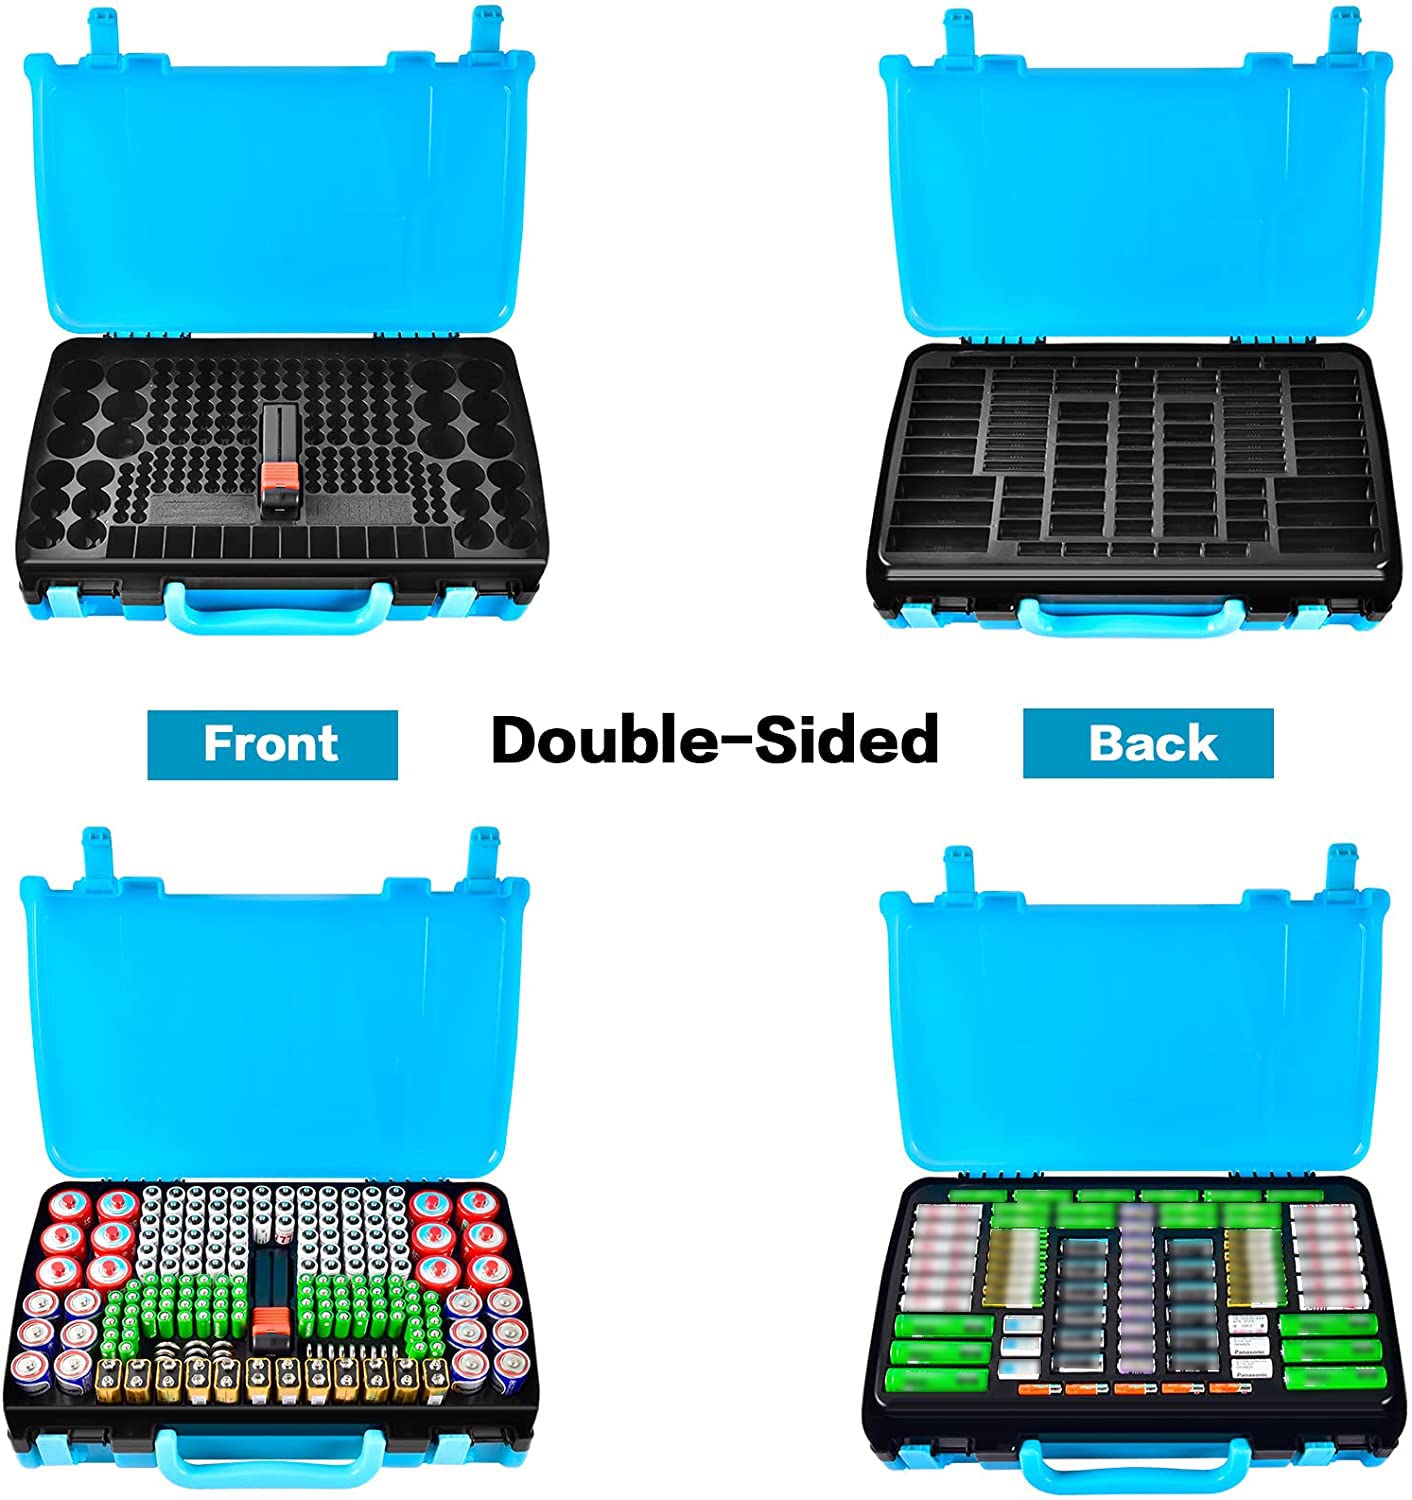 Battery Organizer Storage Case with Tester, Double-Sided Batteries Box Holder Fits for 269 AA AAA AAAA 3A 4A 9V C D Lithium 23A 4LR44 CR123A CR1632 CR2032, Battery Garage Container Keeper- Blue